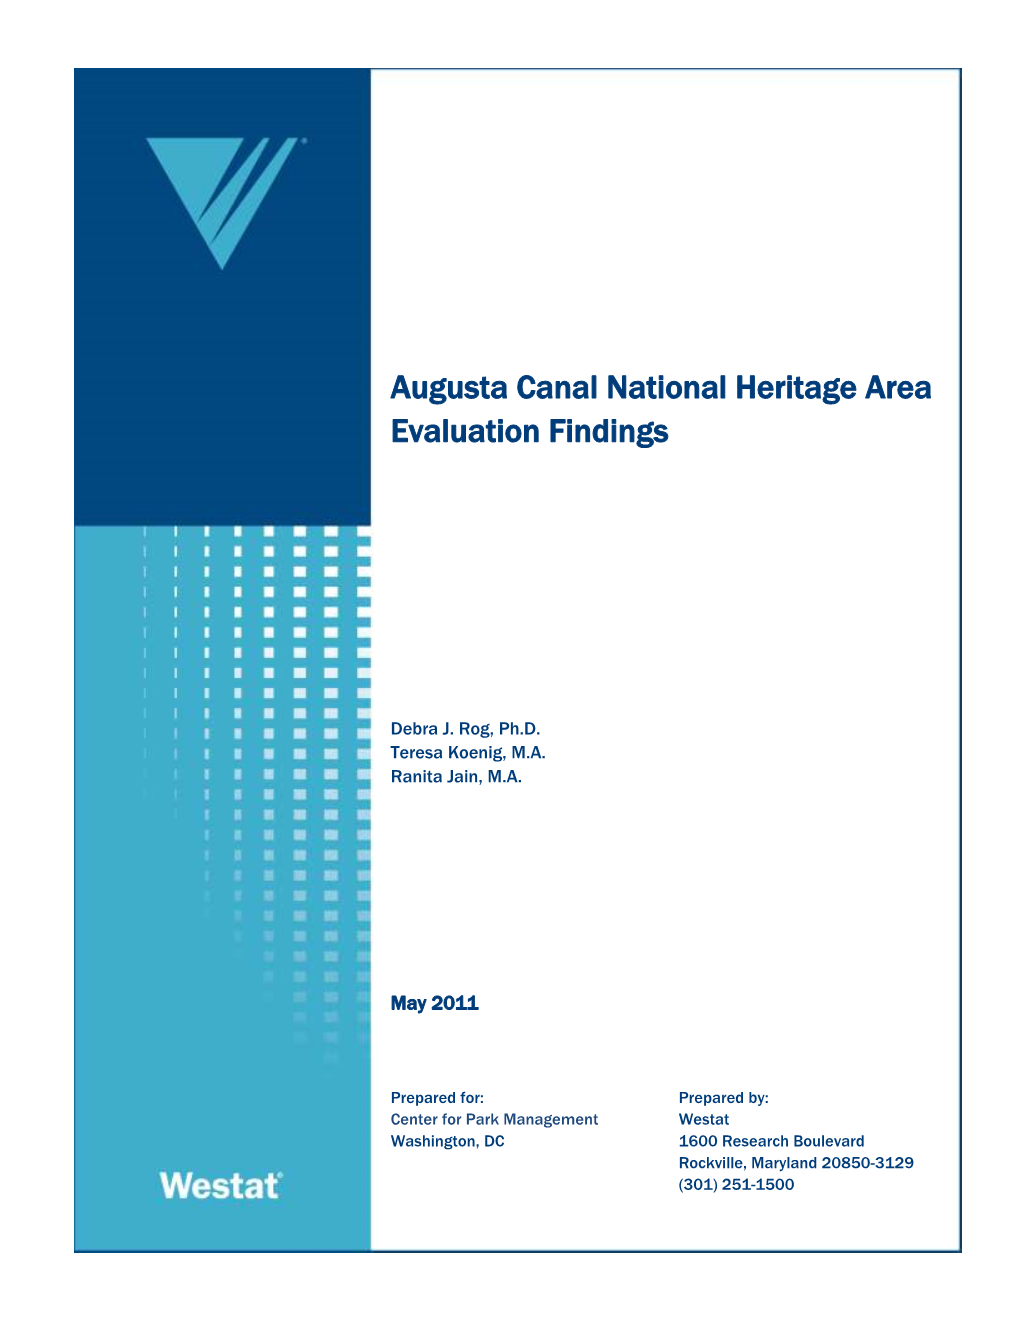 Augusta Canal National Heritage Area Evaluation Findings